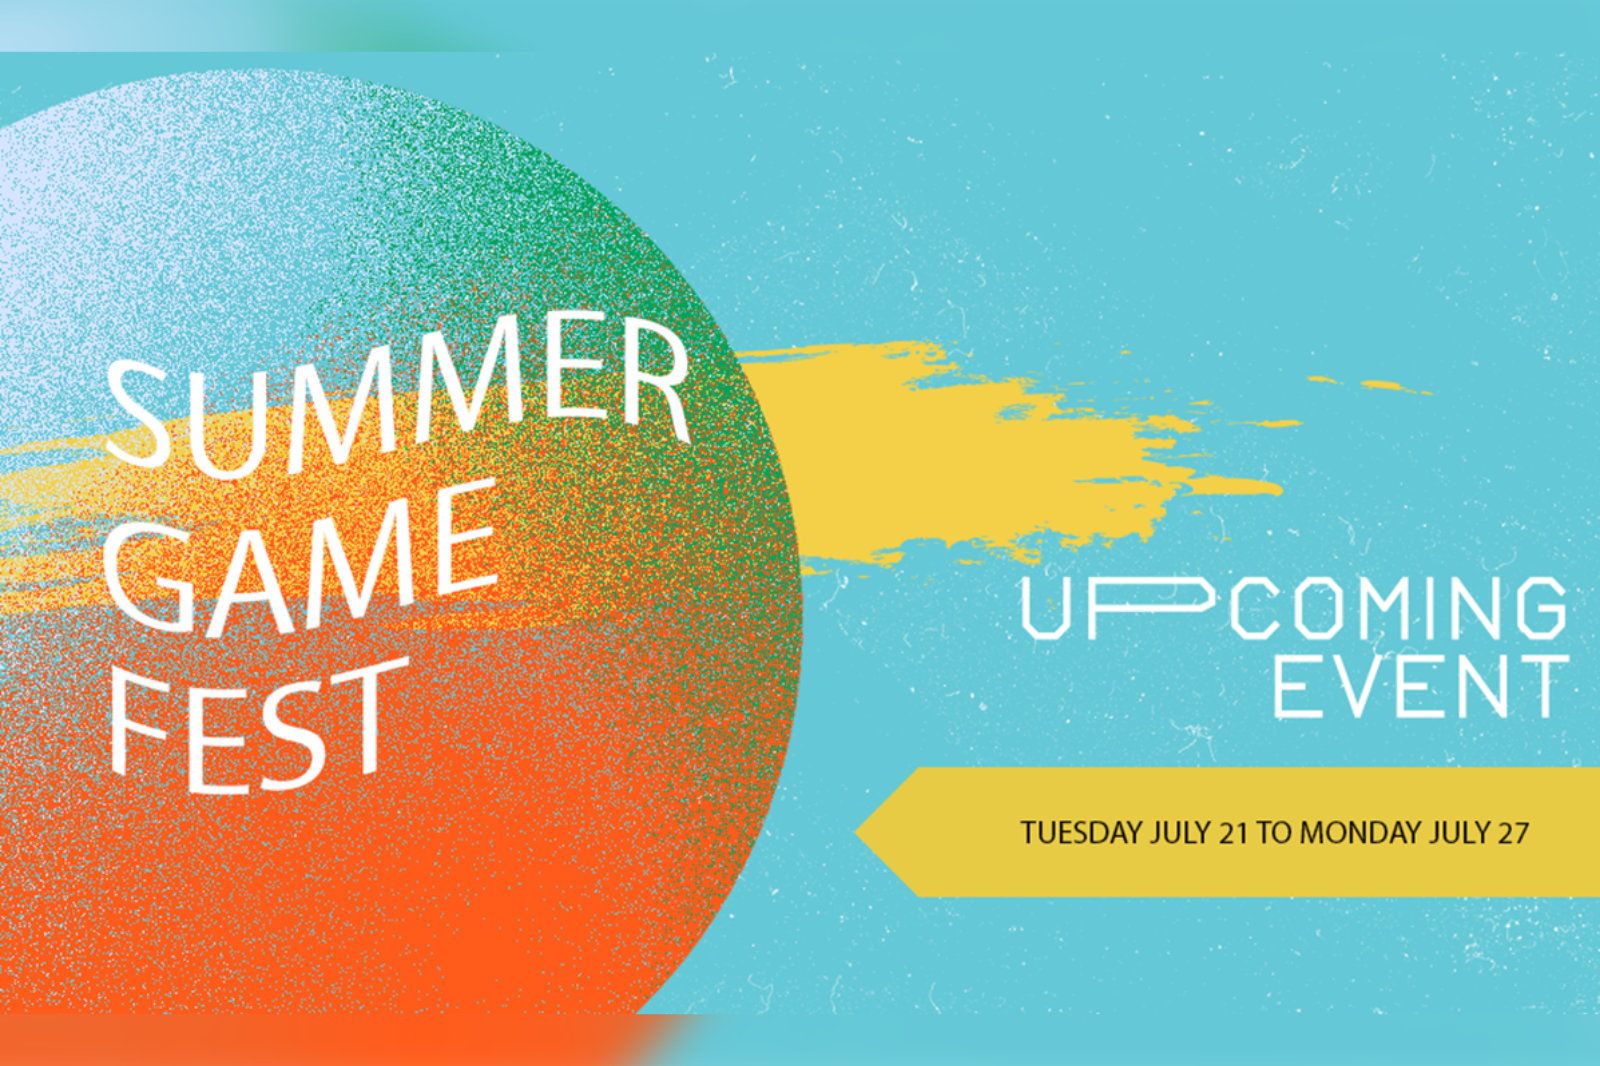 Xbox Summer Game Fest will let you play 60 brand new game demos